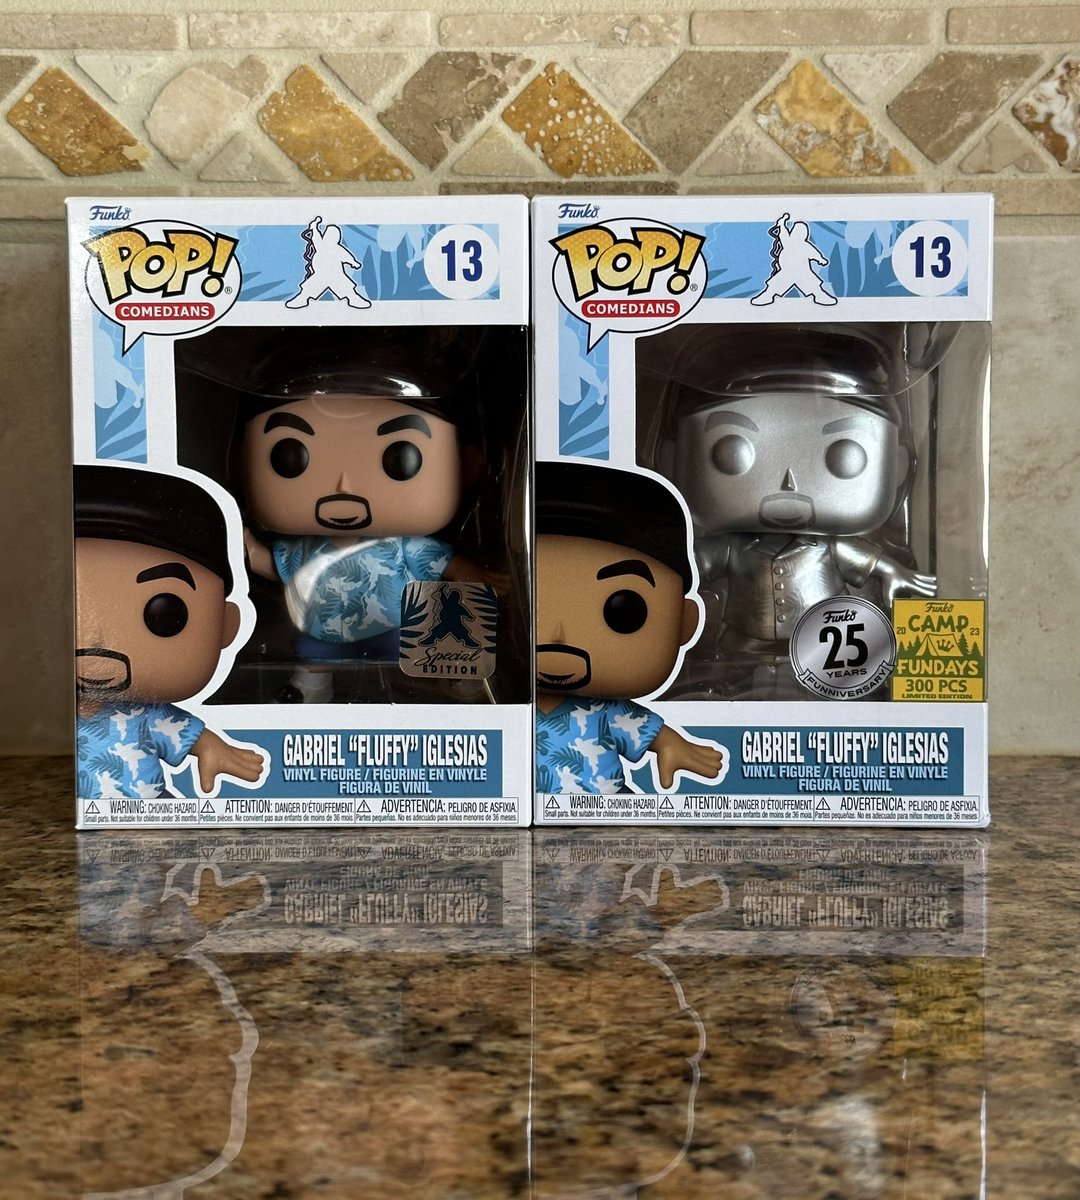 Mail Call! Got my Jumping Fluffy Pops!
.
#Funko #FunkoPops #Fluffy #GabrielIglesias #Collectibles #DisTrackers